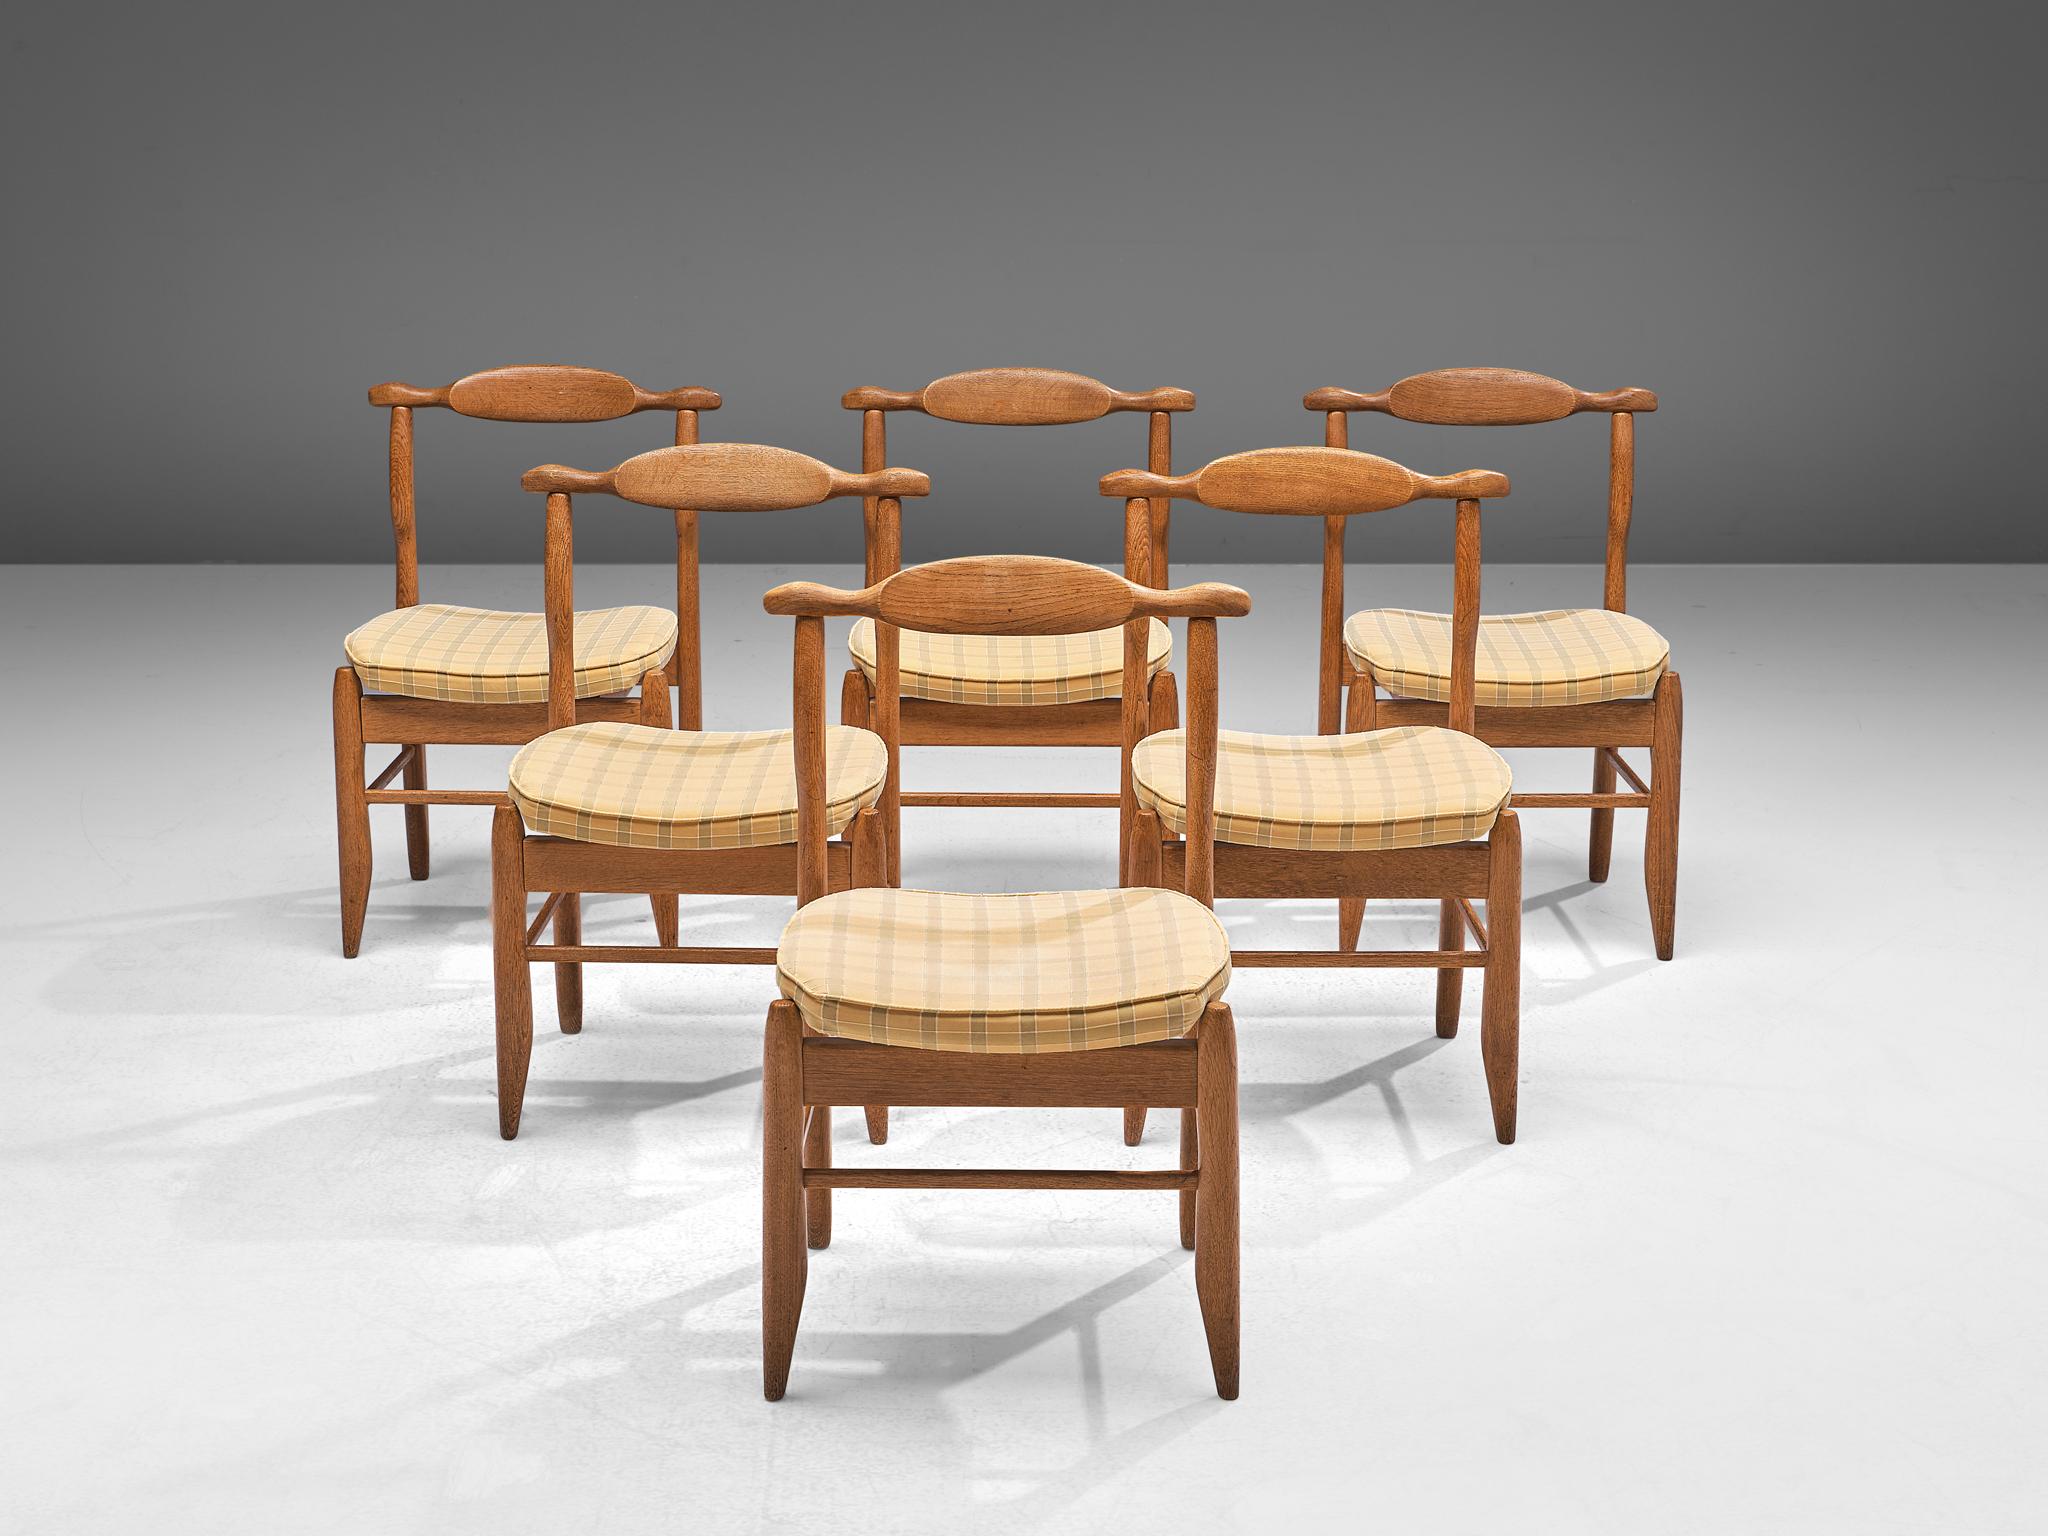 Guillerme & Chambron, set of six dining chairs, in oak and yellow checkered fabric, France, 1960s.

Set of six elegant carved dining chairs in solid oak by Guillerme and Chambron. These chairs show the characteristic frame of this French designer